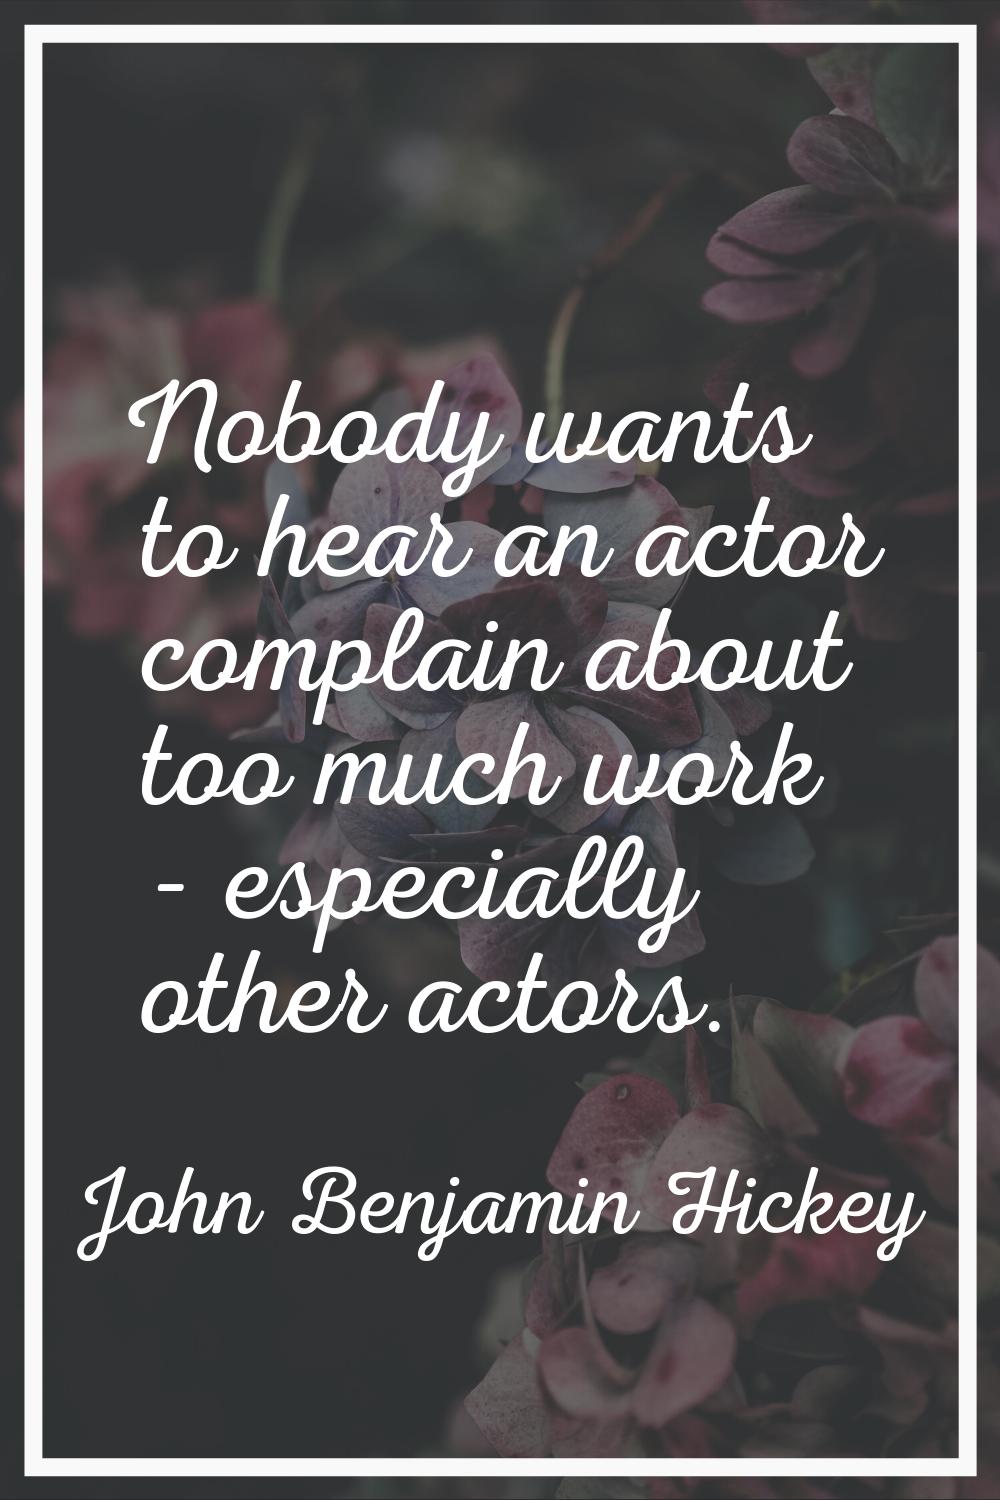 Nobody wants to hear an actor complain about too much work - especially other actors.